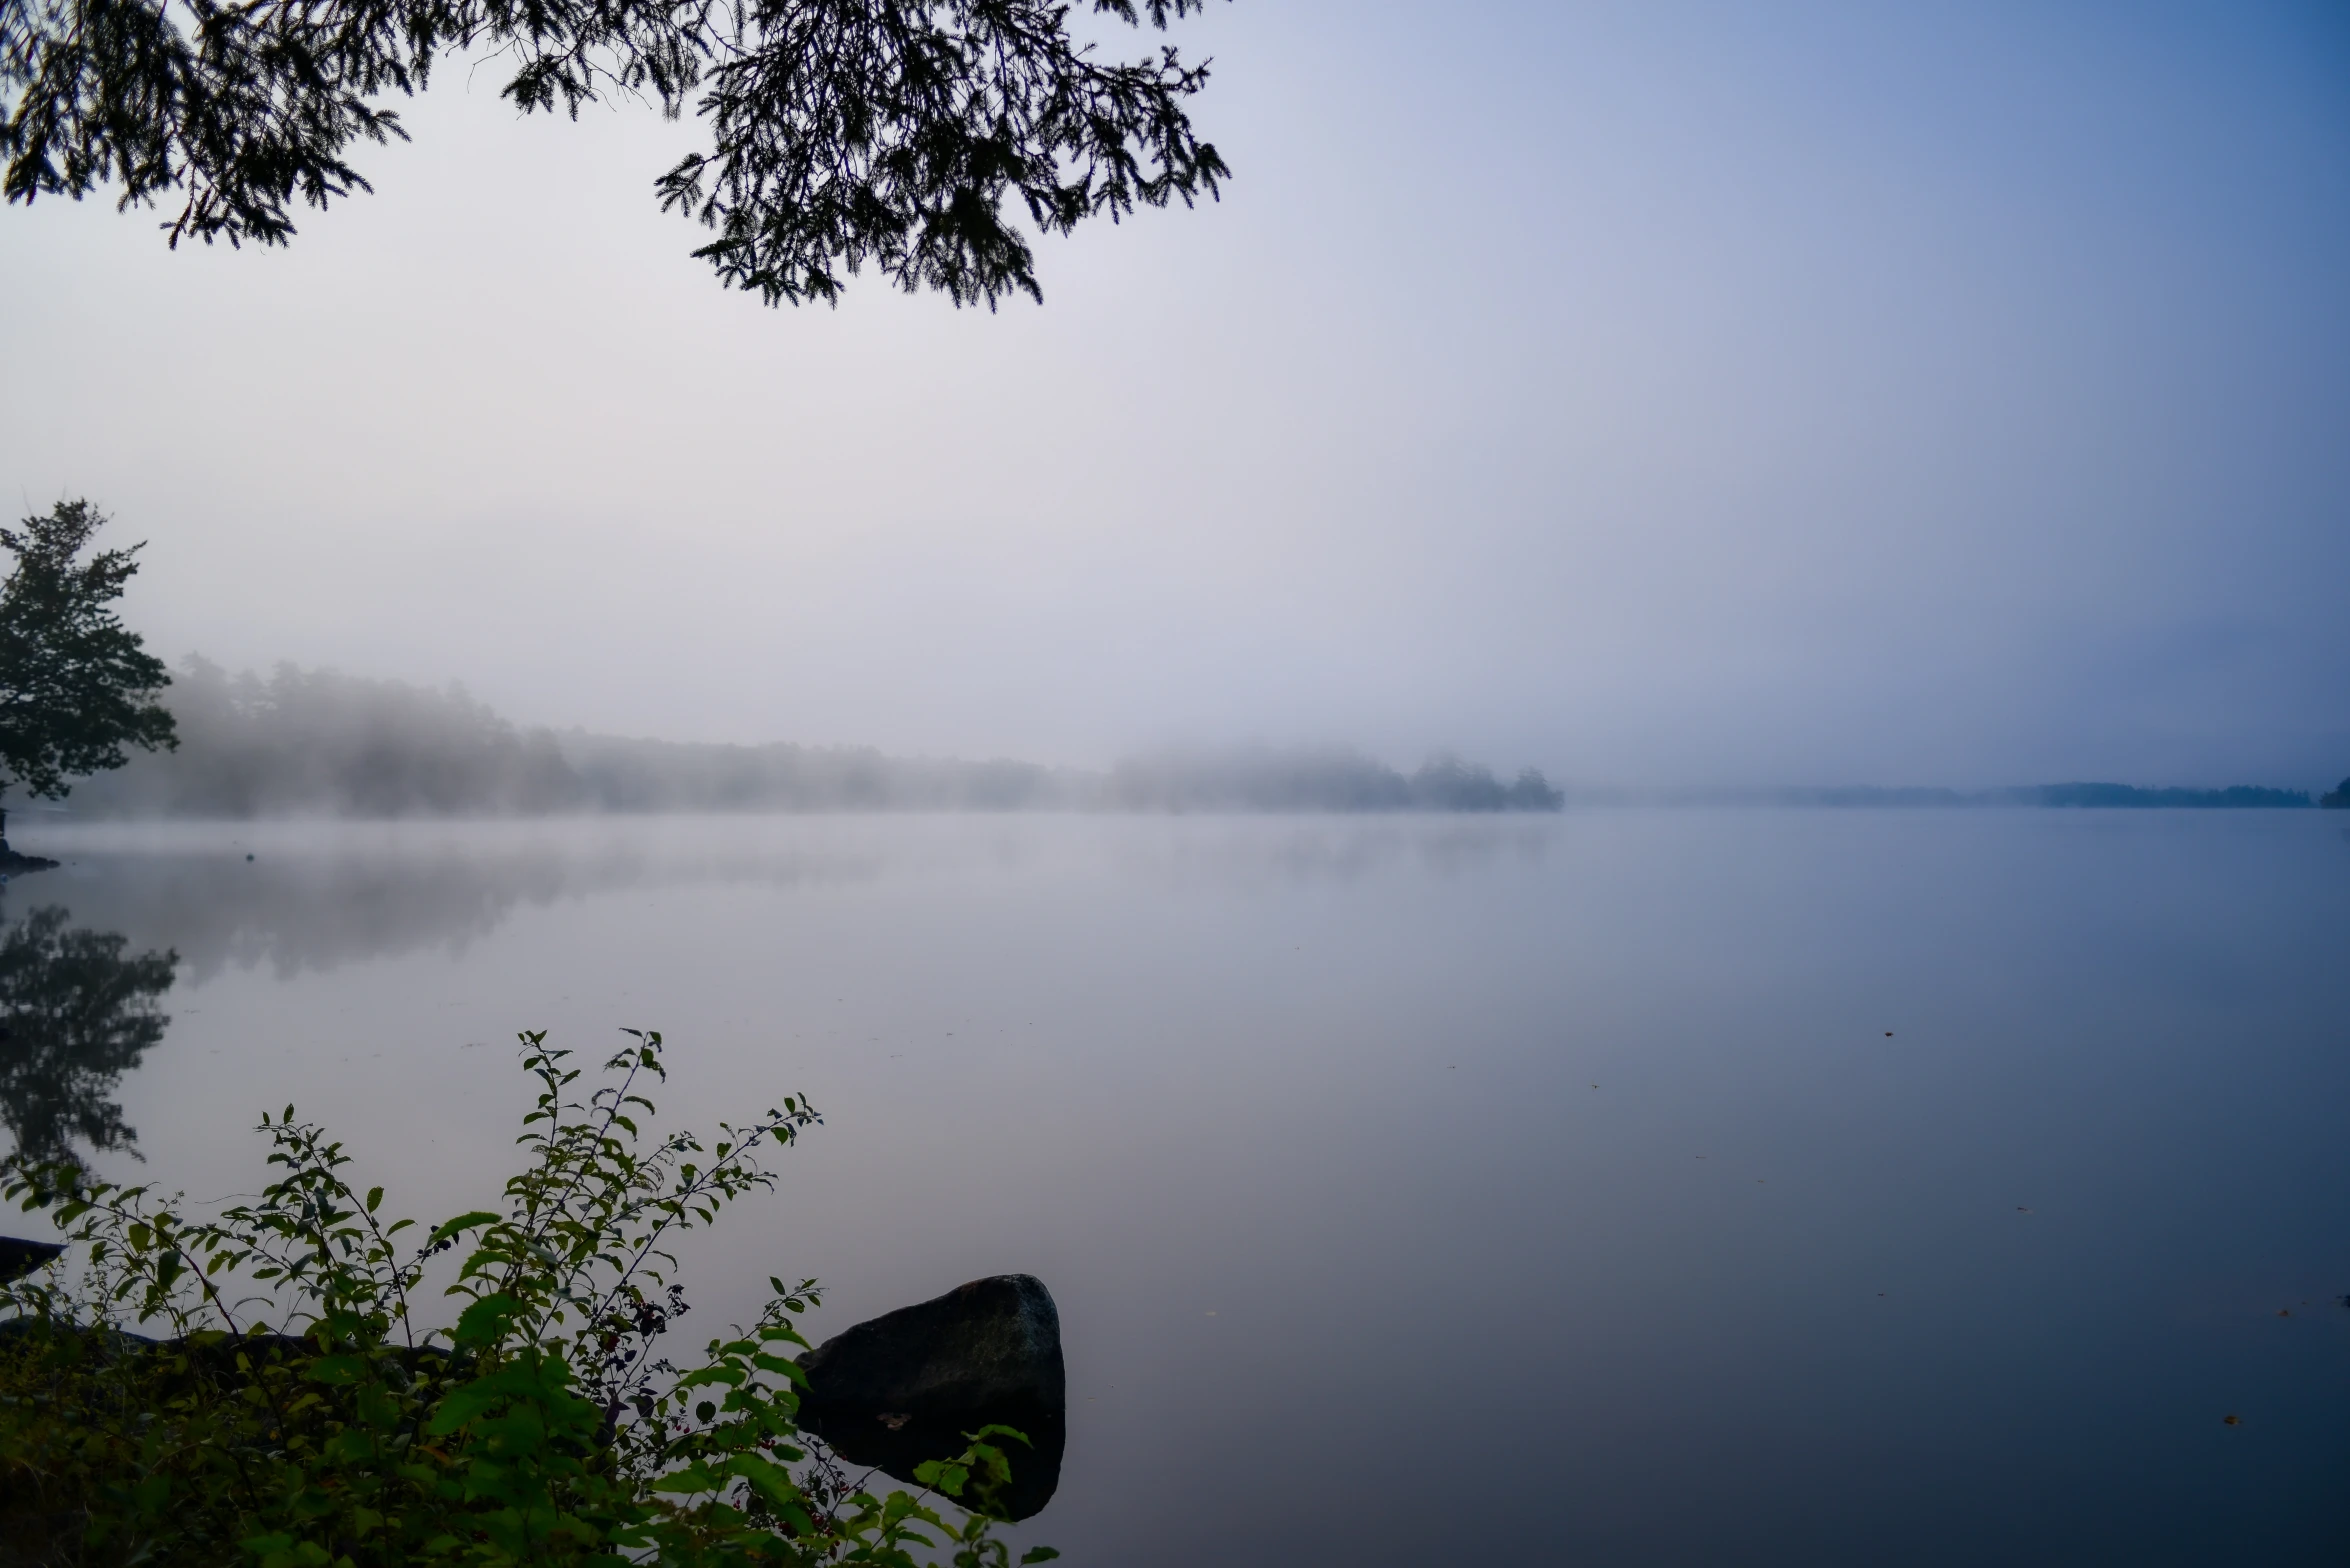 fog covers the lake near some trees